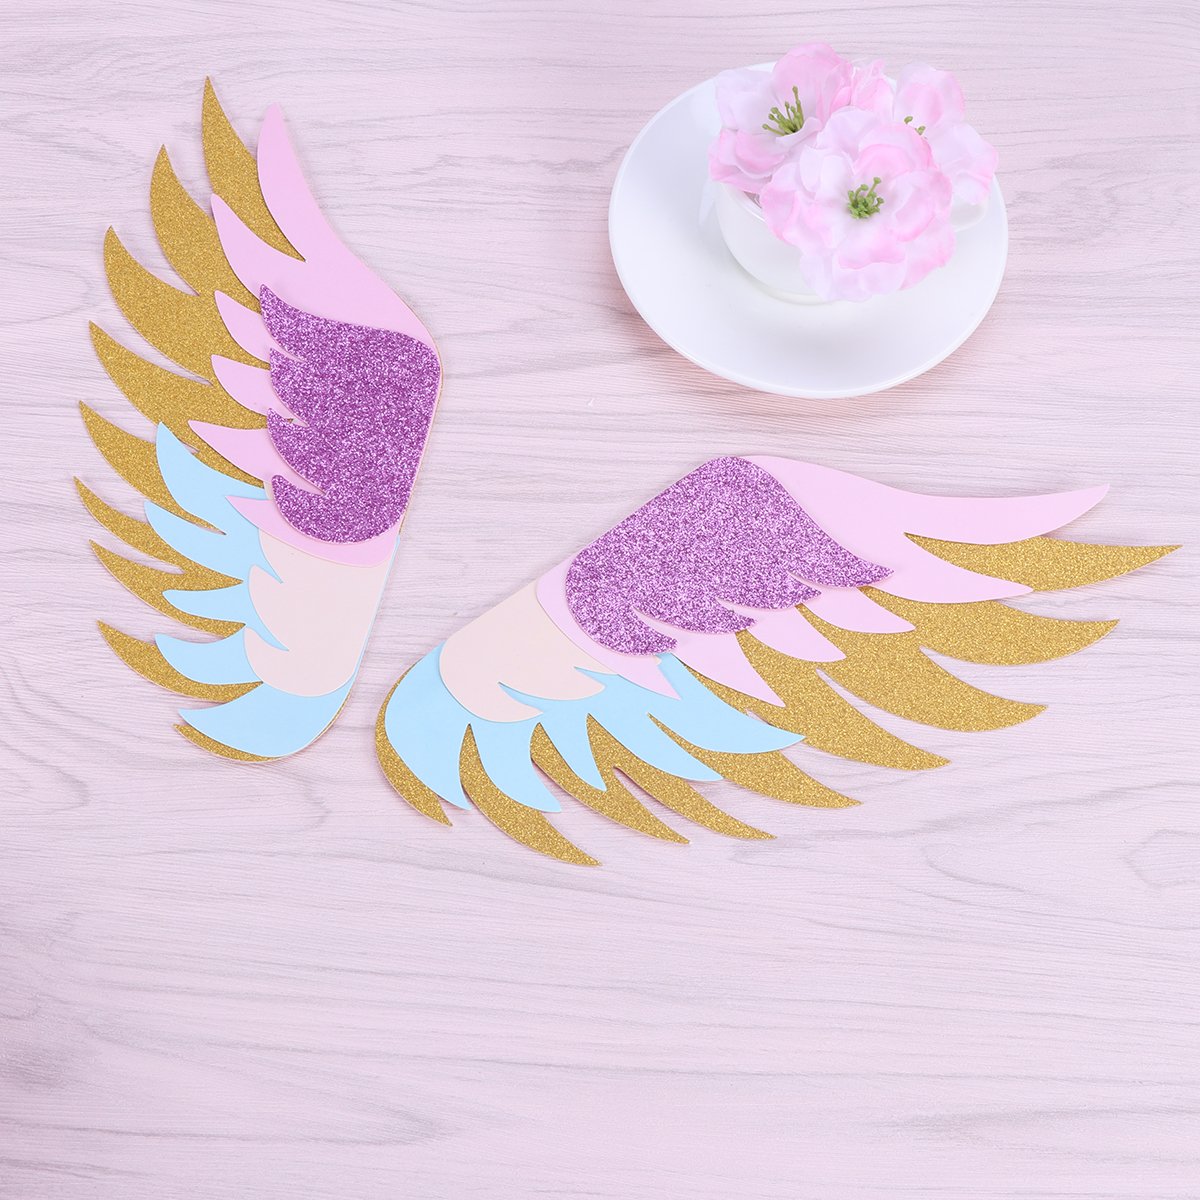 Unicorn Wings Cake Topper Glitter Paper Cake Insertion Card Cake Decoration Cupcake Toppers Birthday Baby Shower Wedding 3PCS - image 2 of 6